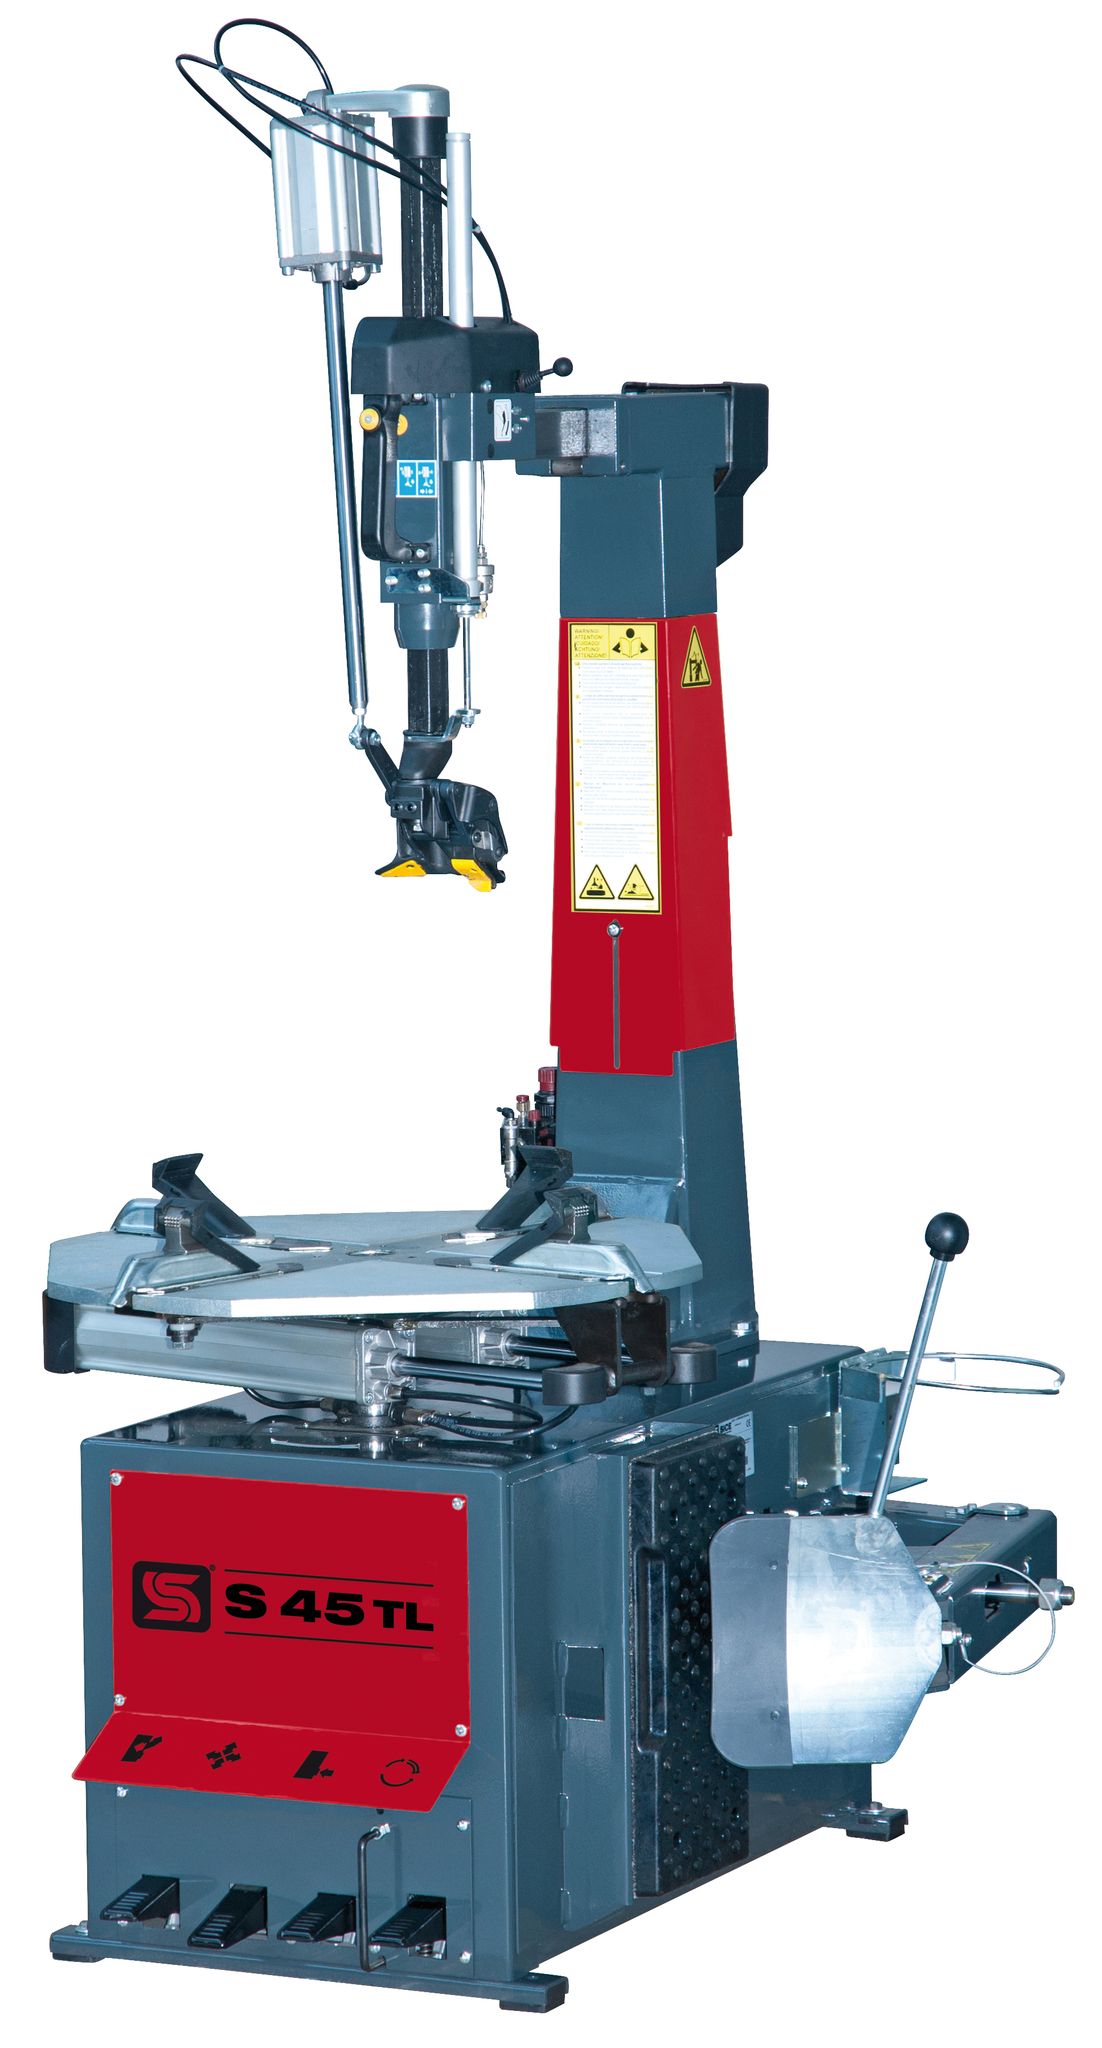 S45TL Leverless Car Tyre Changer With PT250 Arm}